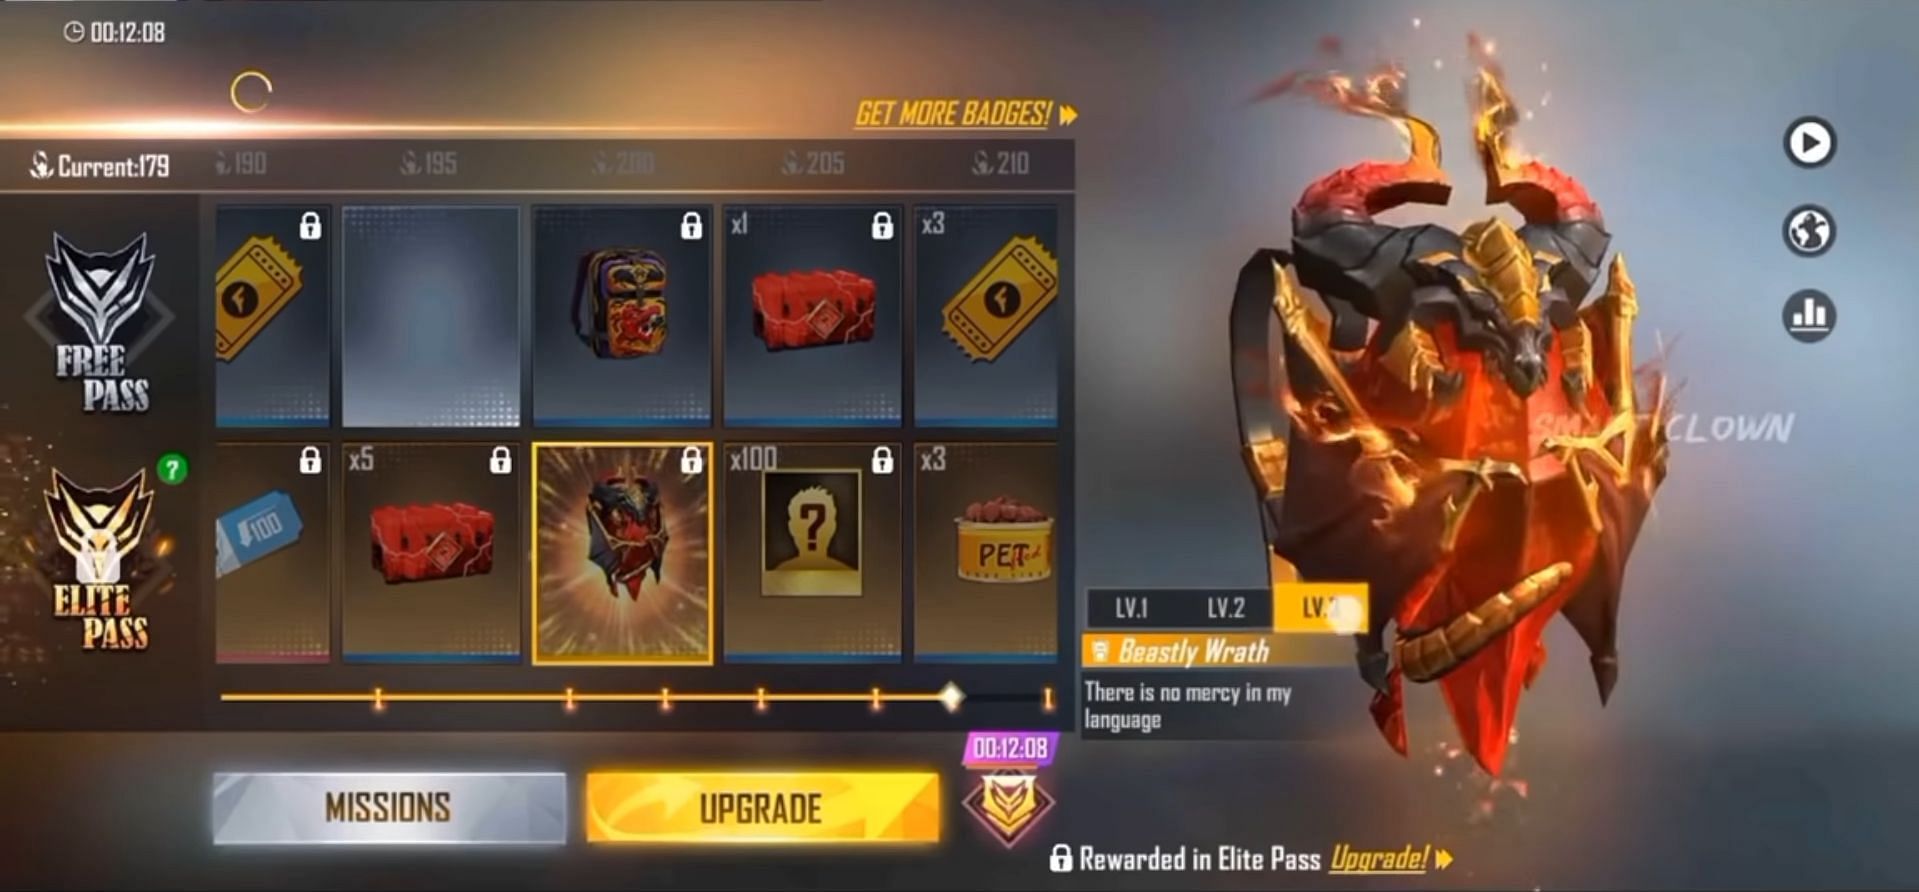 Beastly Wrath backpack can only be attained 200 badges (Image via ONE FOR ALL GAMING / YouTube)